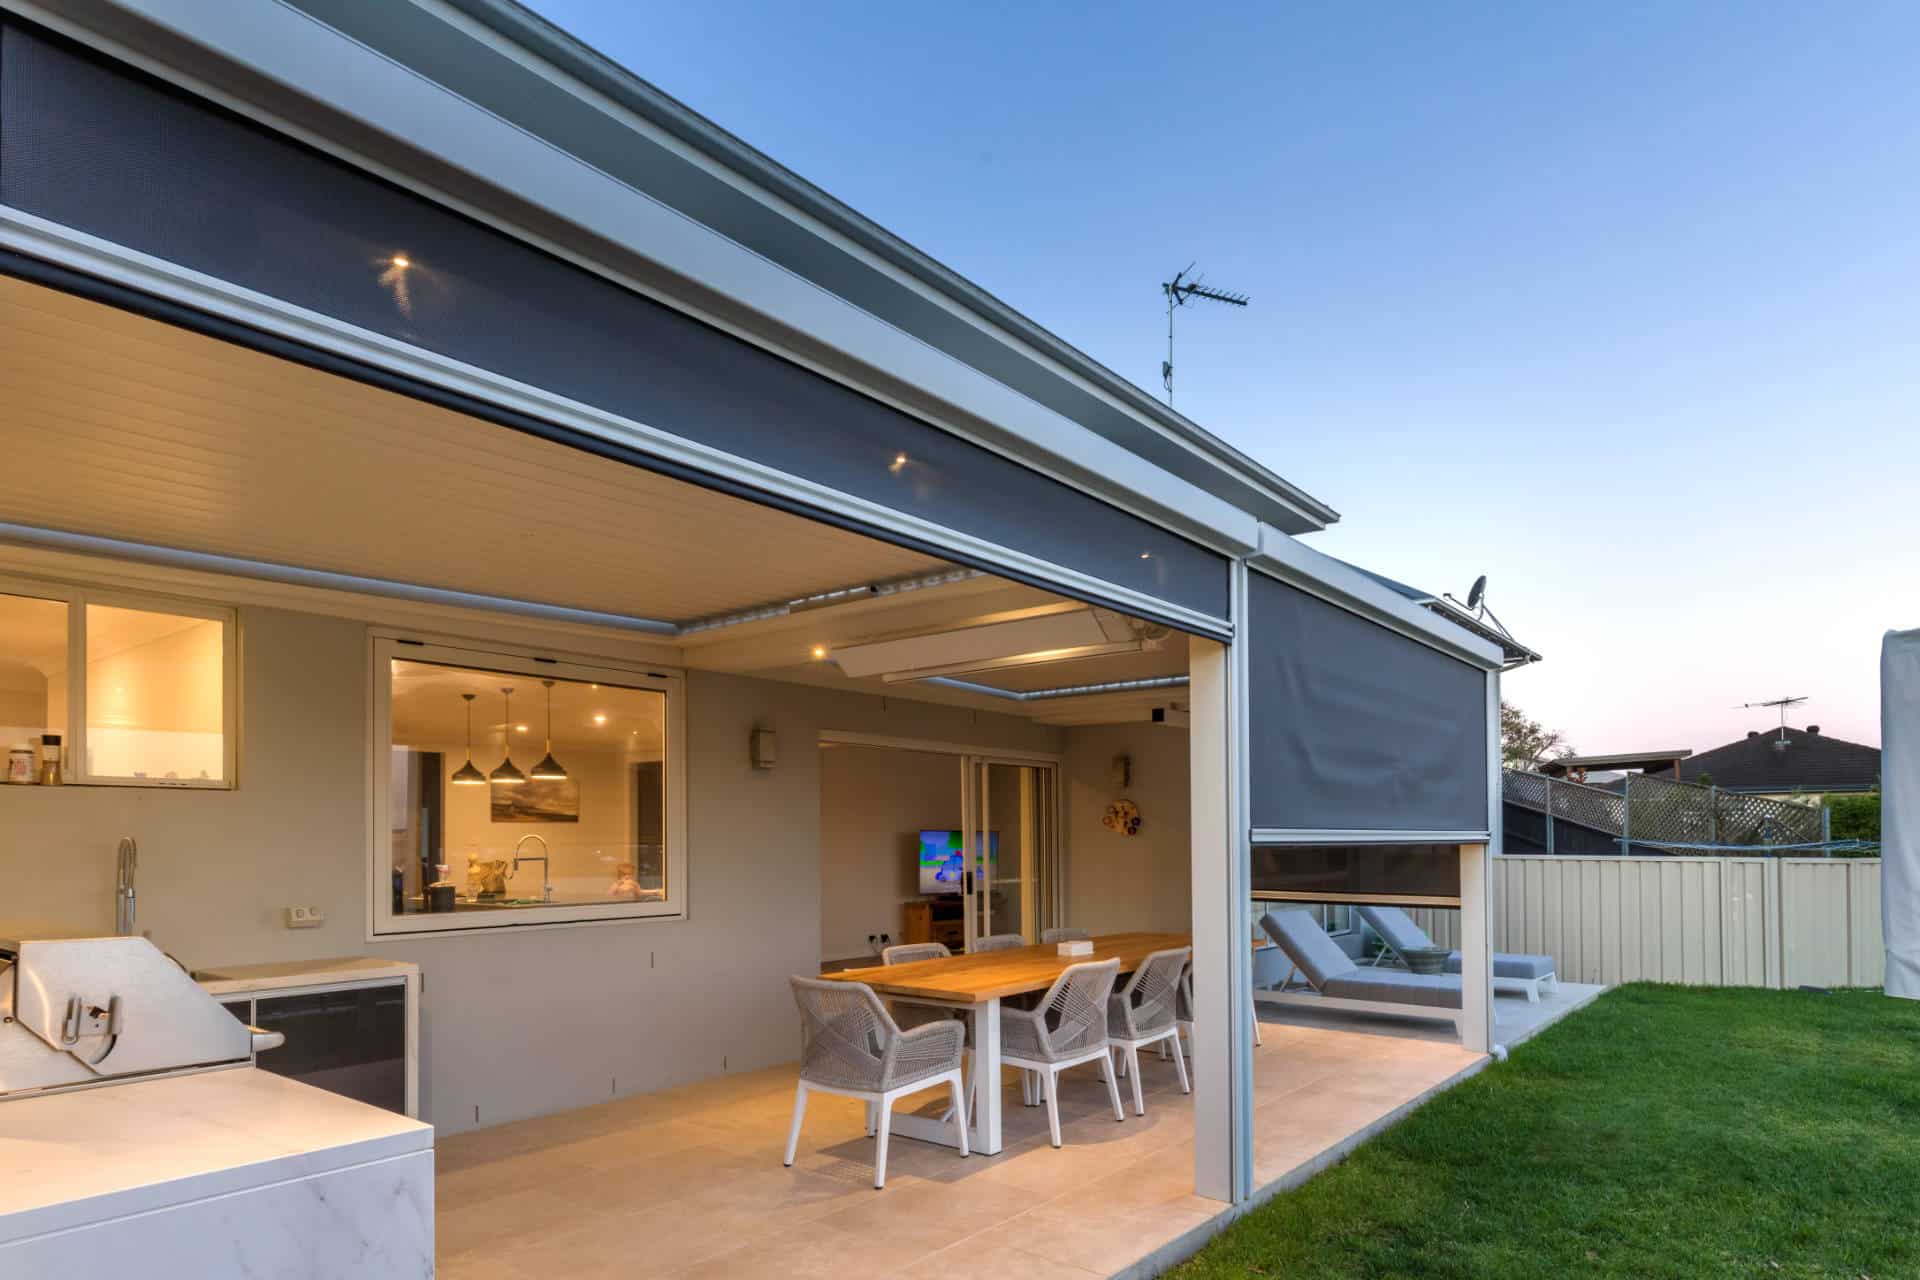 Manly Vale pergola with outdoor blinds.